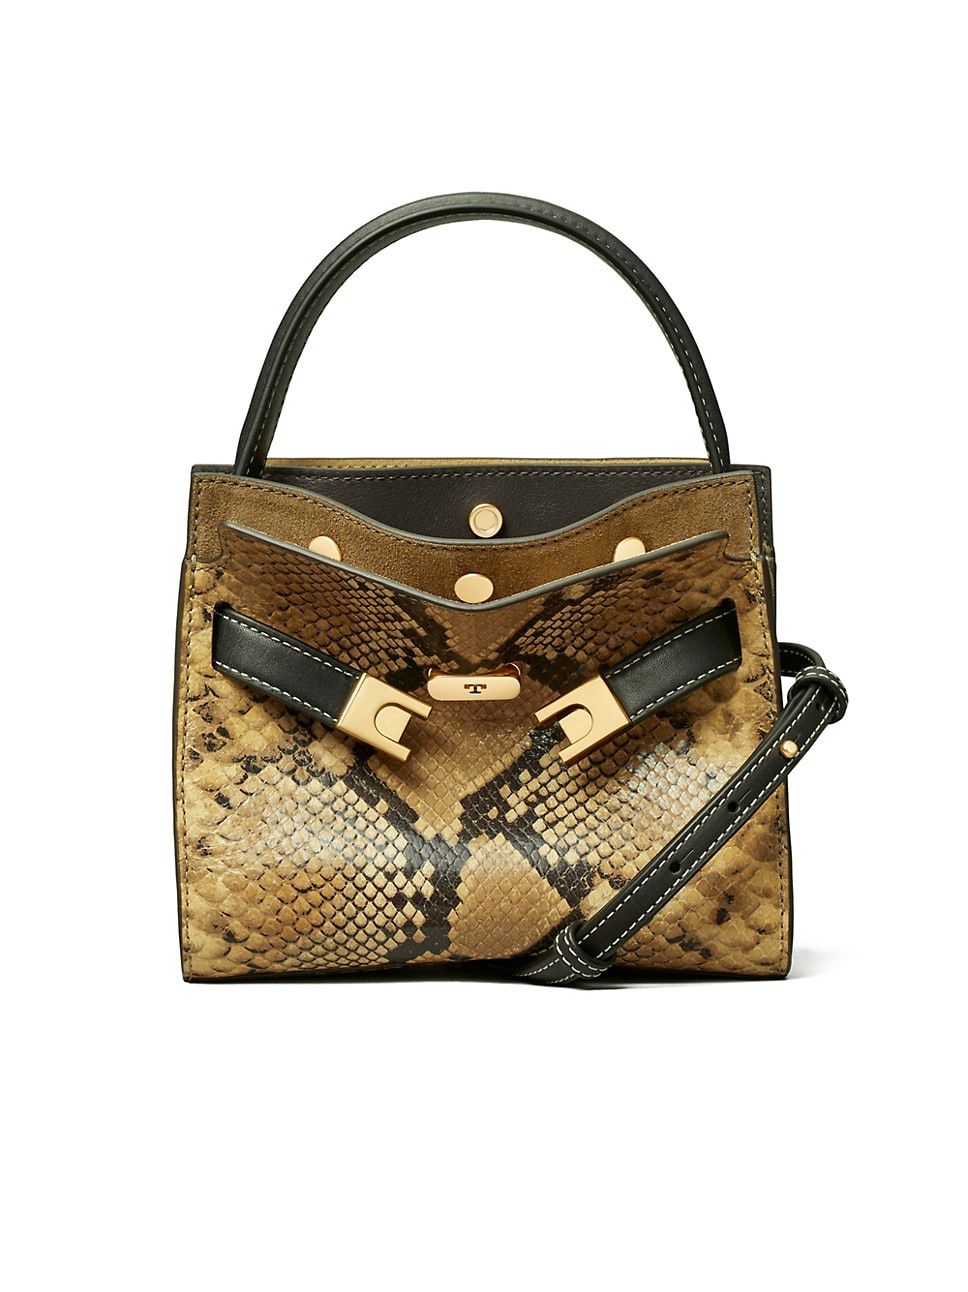 Lee Radziwill Small Snake-Embossed Leather Double Bag | Saks Fifth Avenue